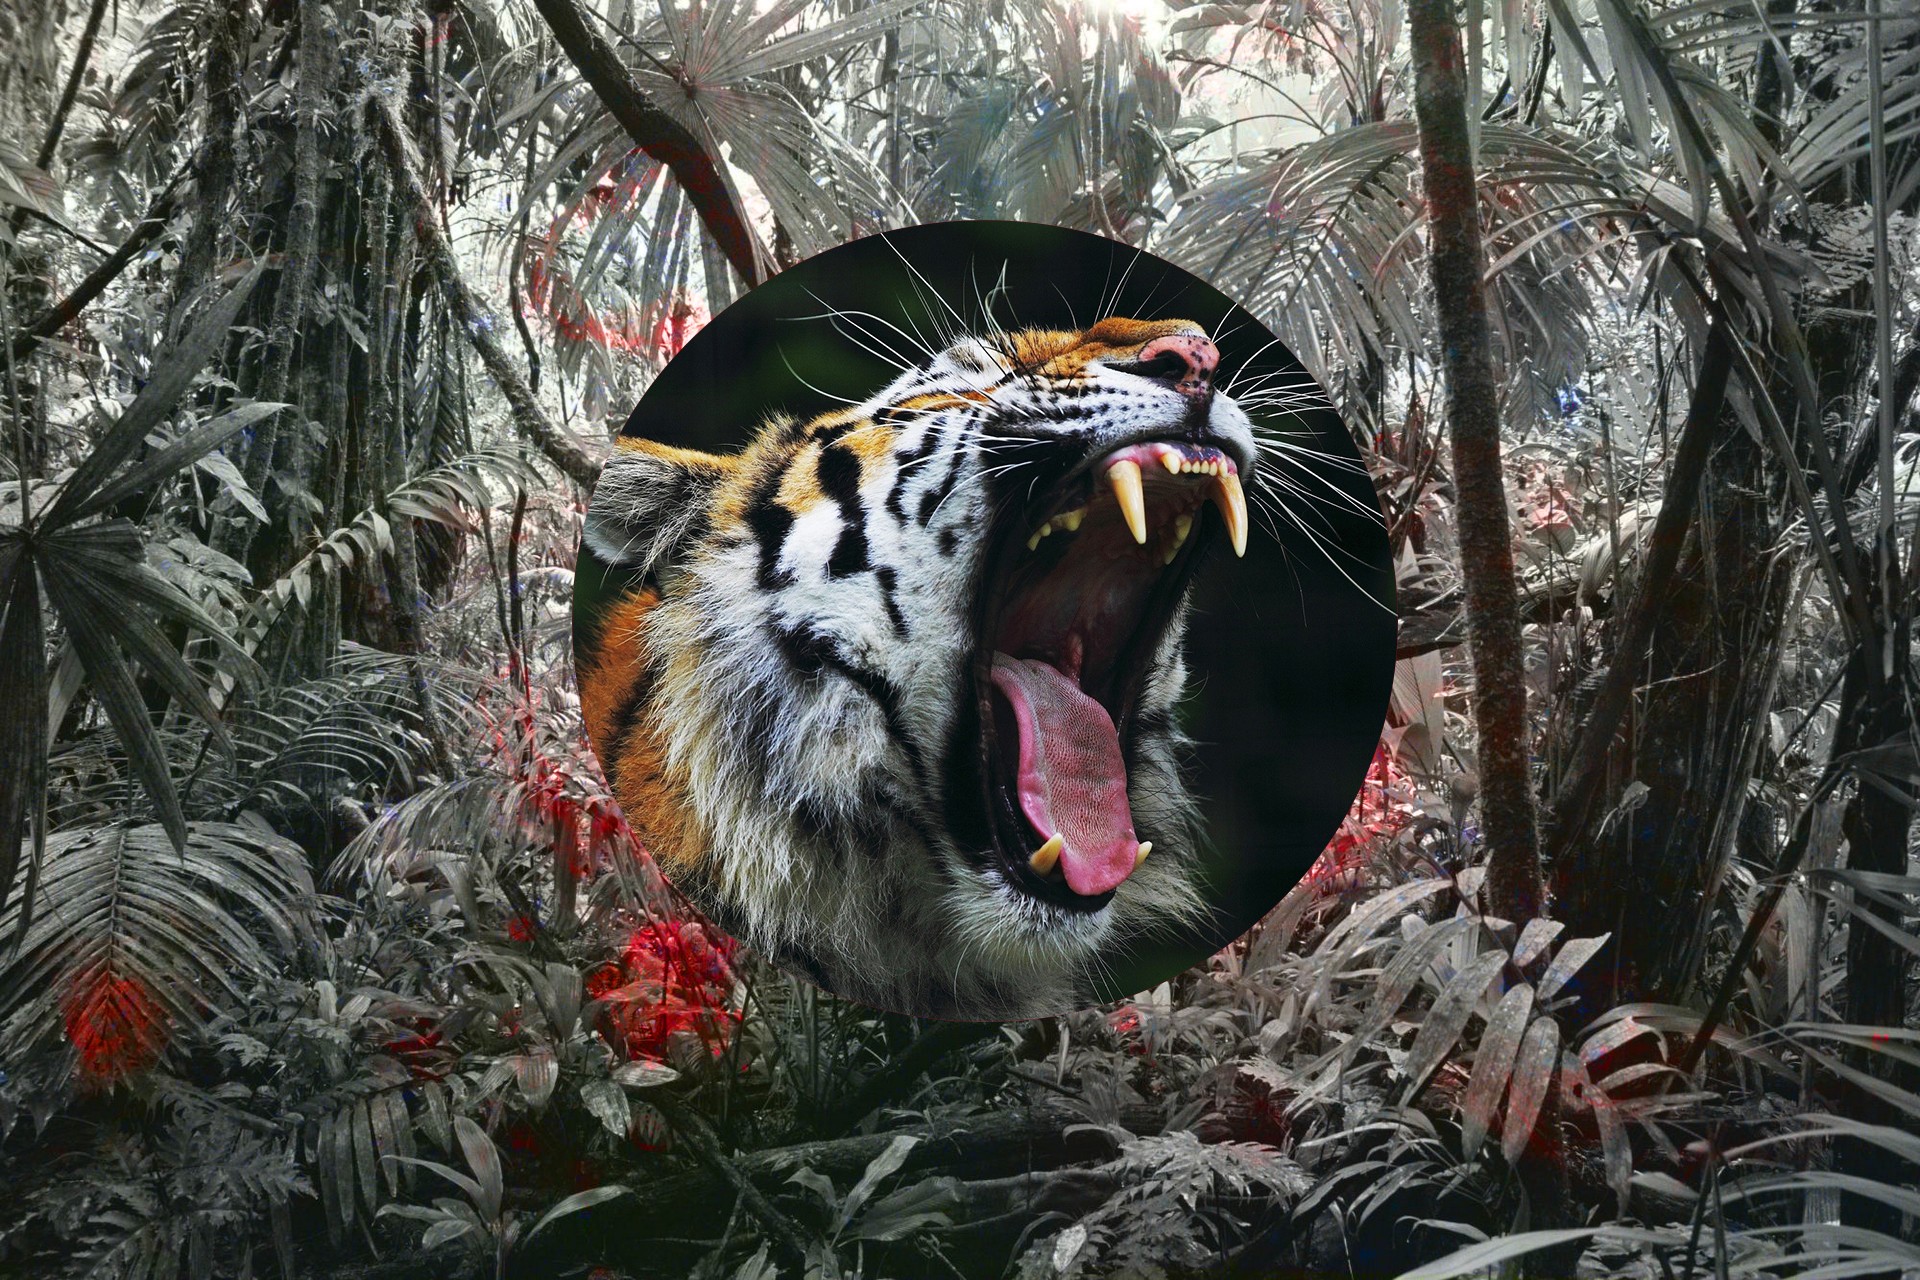 General 1920x1280 tiger animals big cats fangs nature plants mammals feline open mouth tongue out